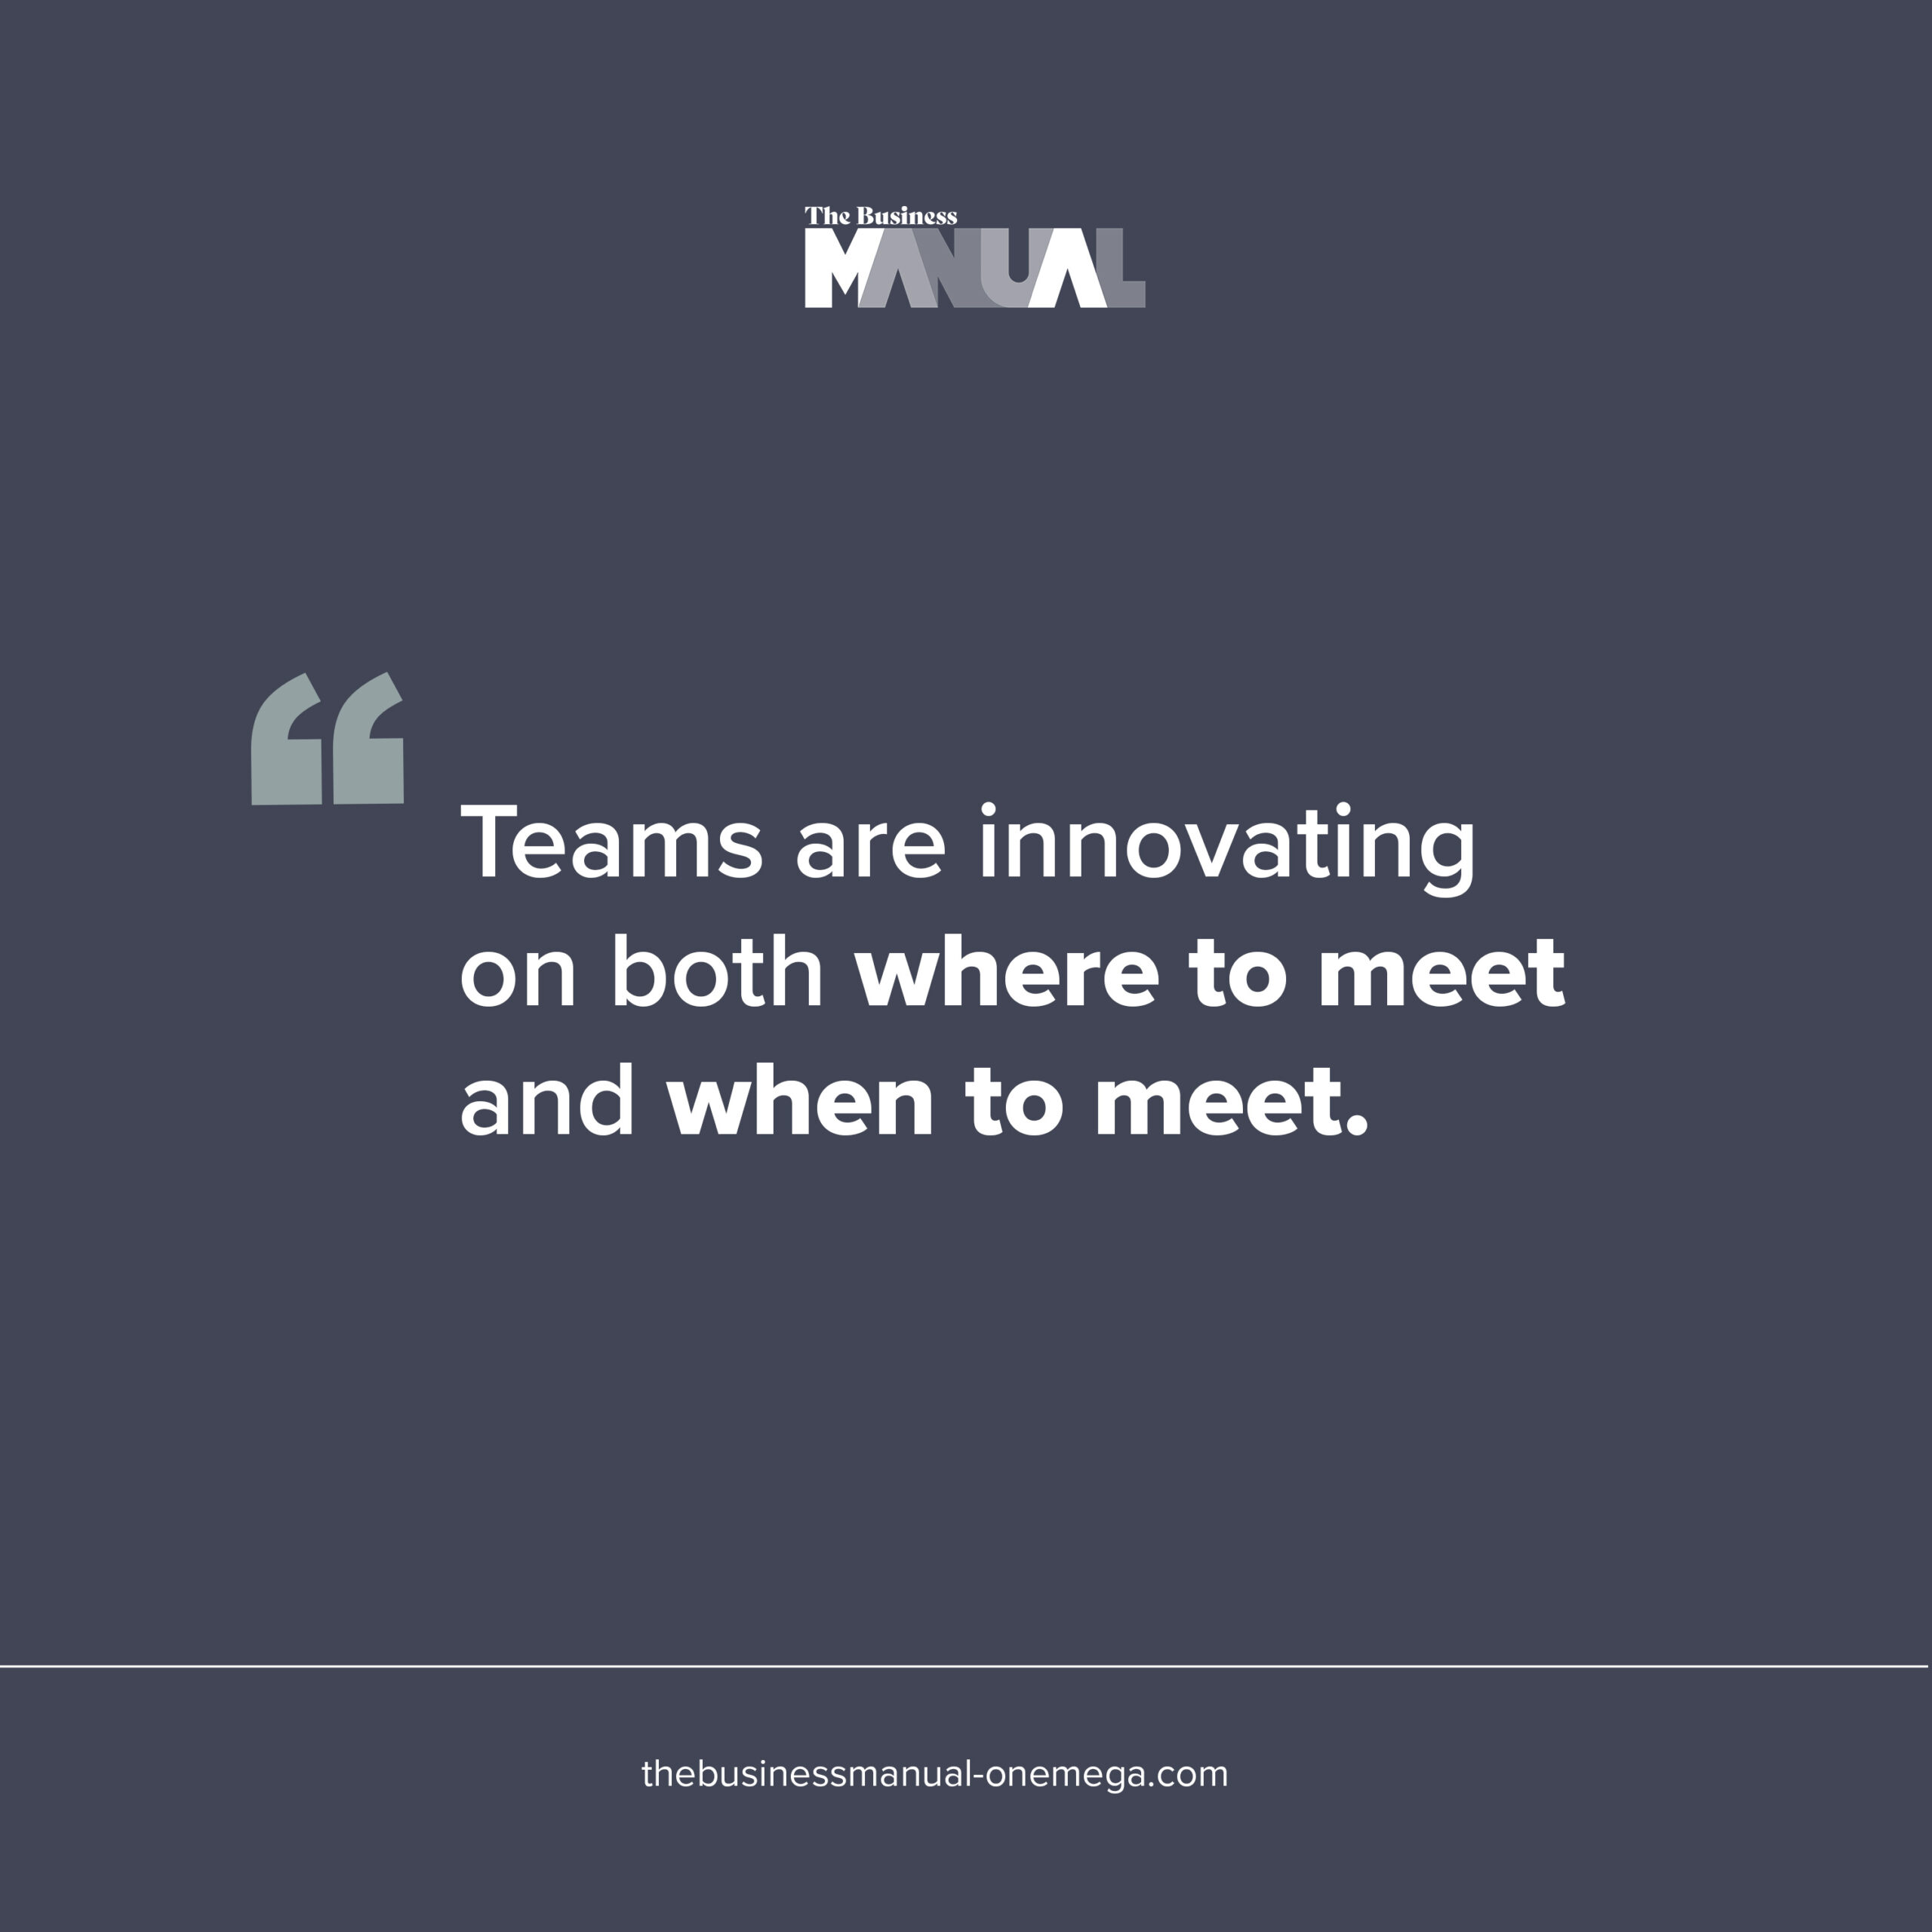 Teams are innovating on both where and when to meet